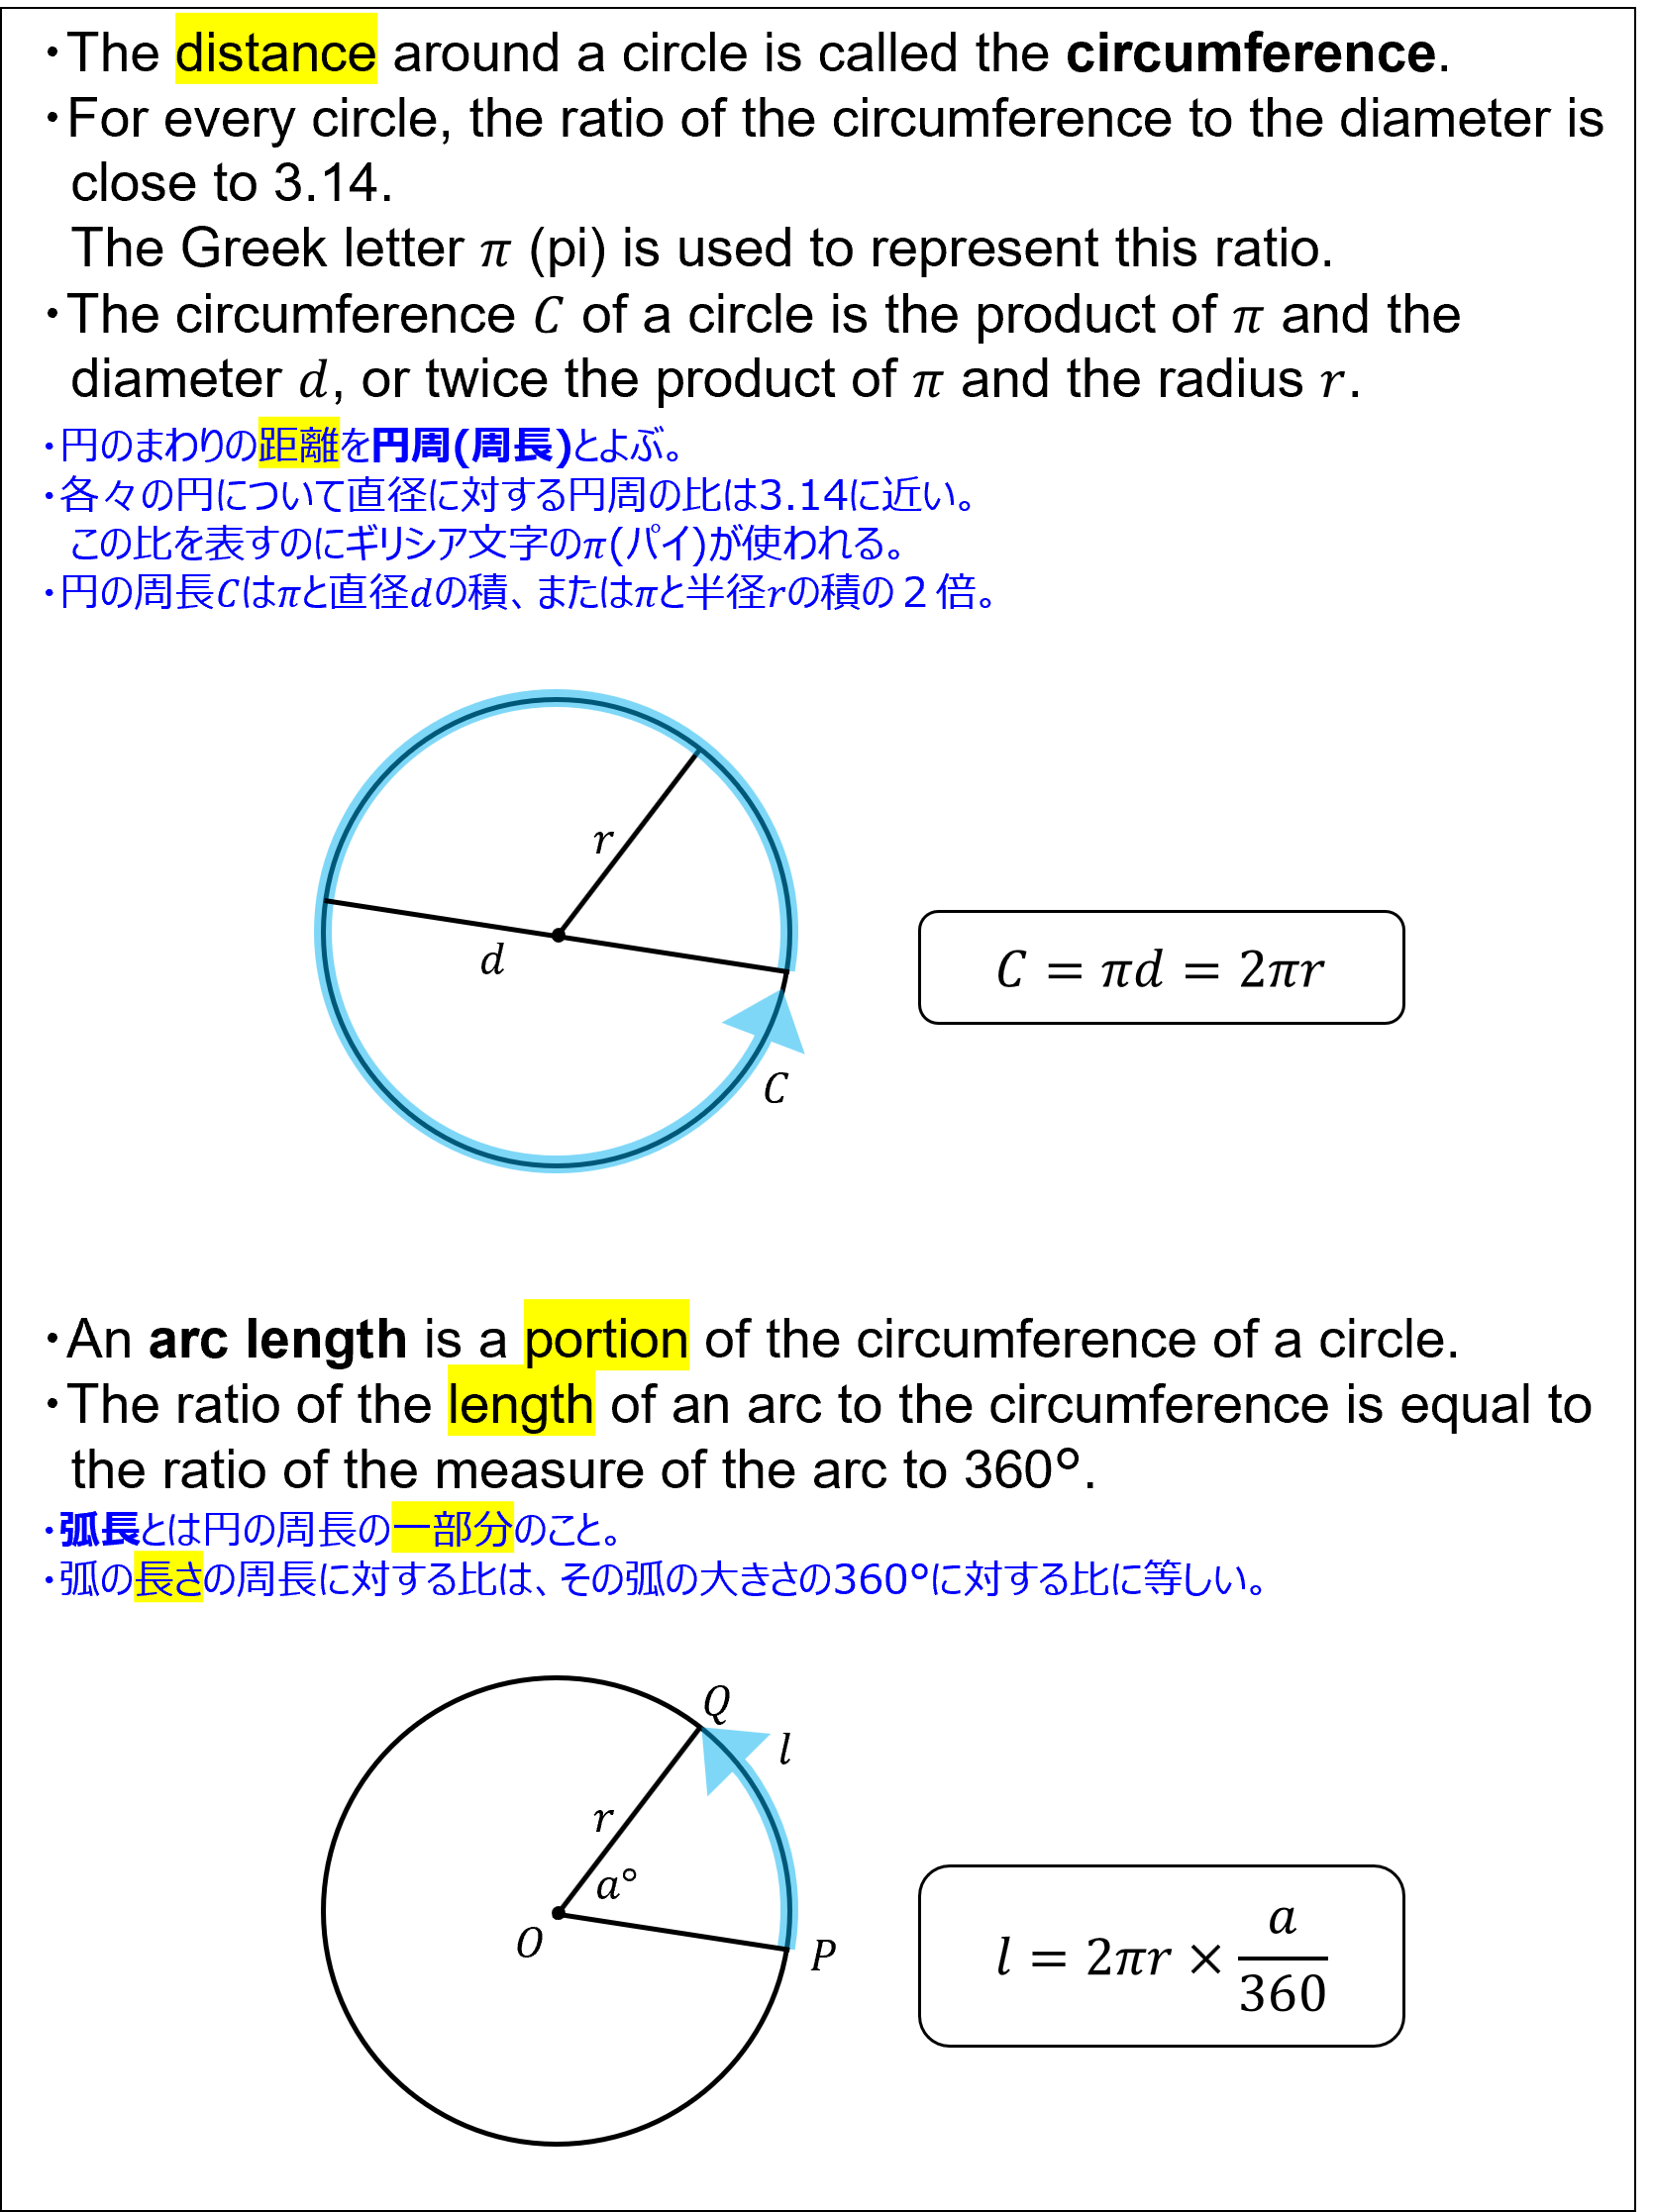 Definition of circumference and arc length.